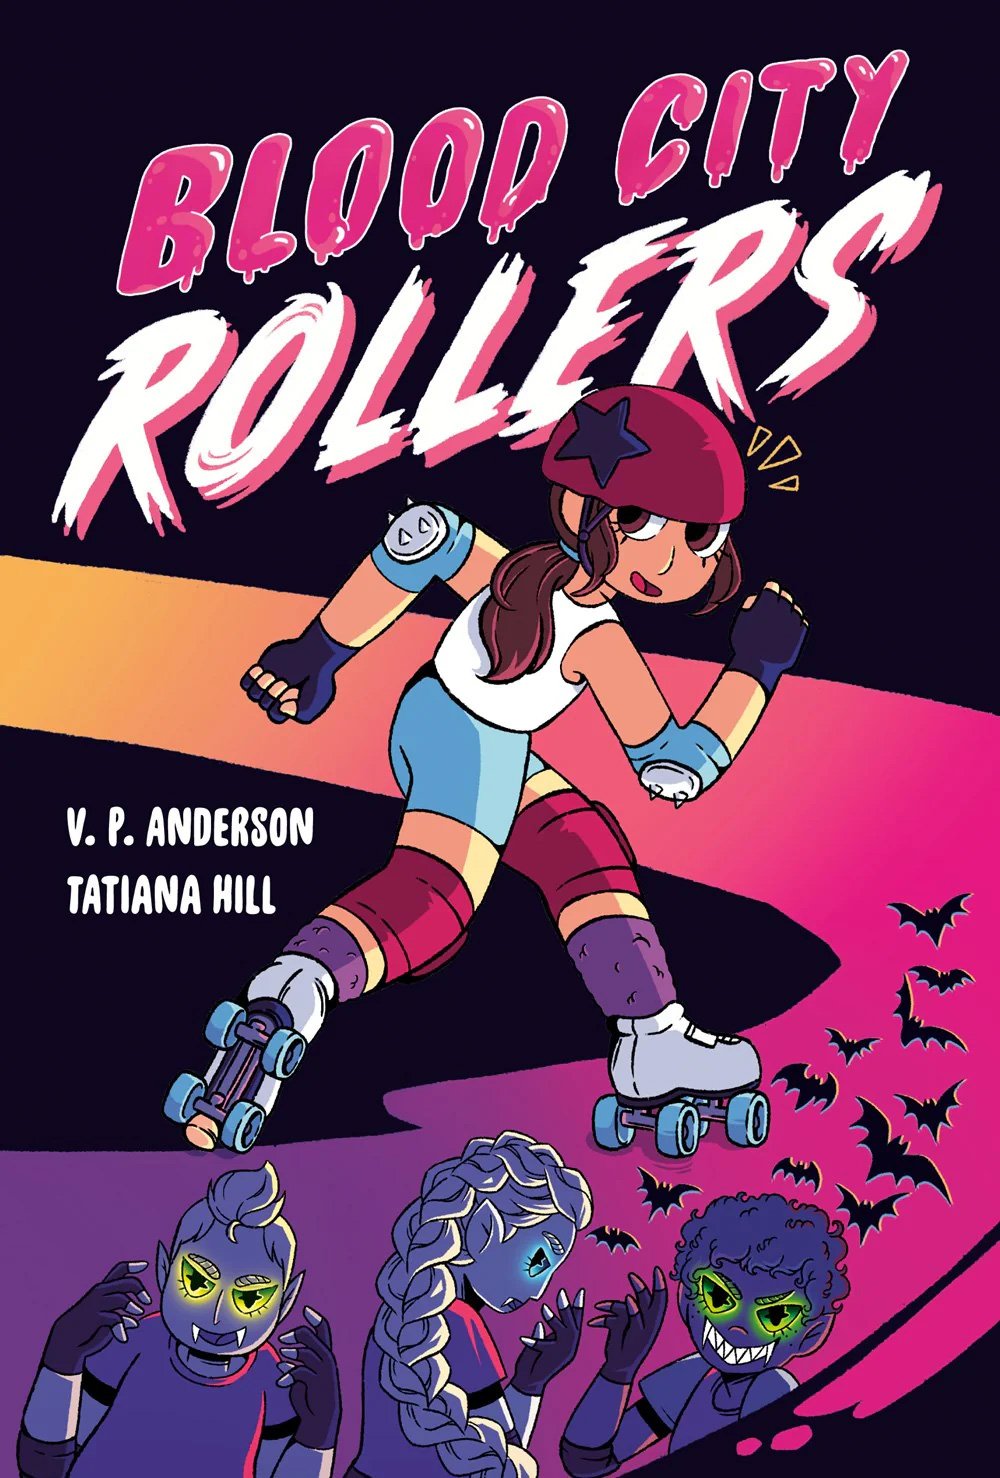 Book cover for Blood City Rollers by V.P. Anderson and Tatiana Hill